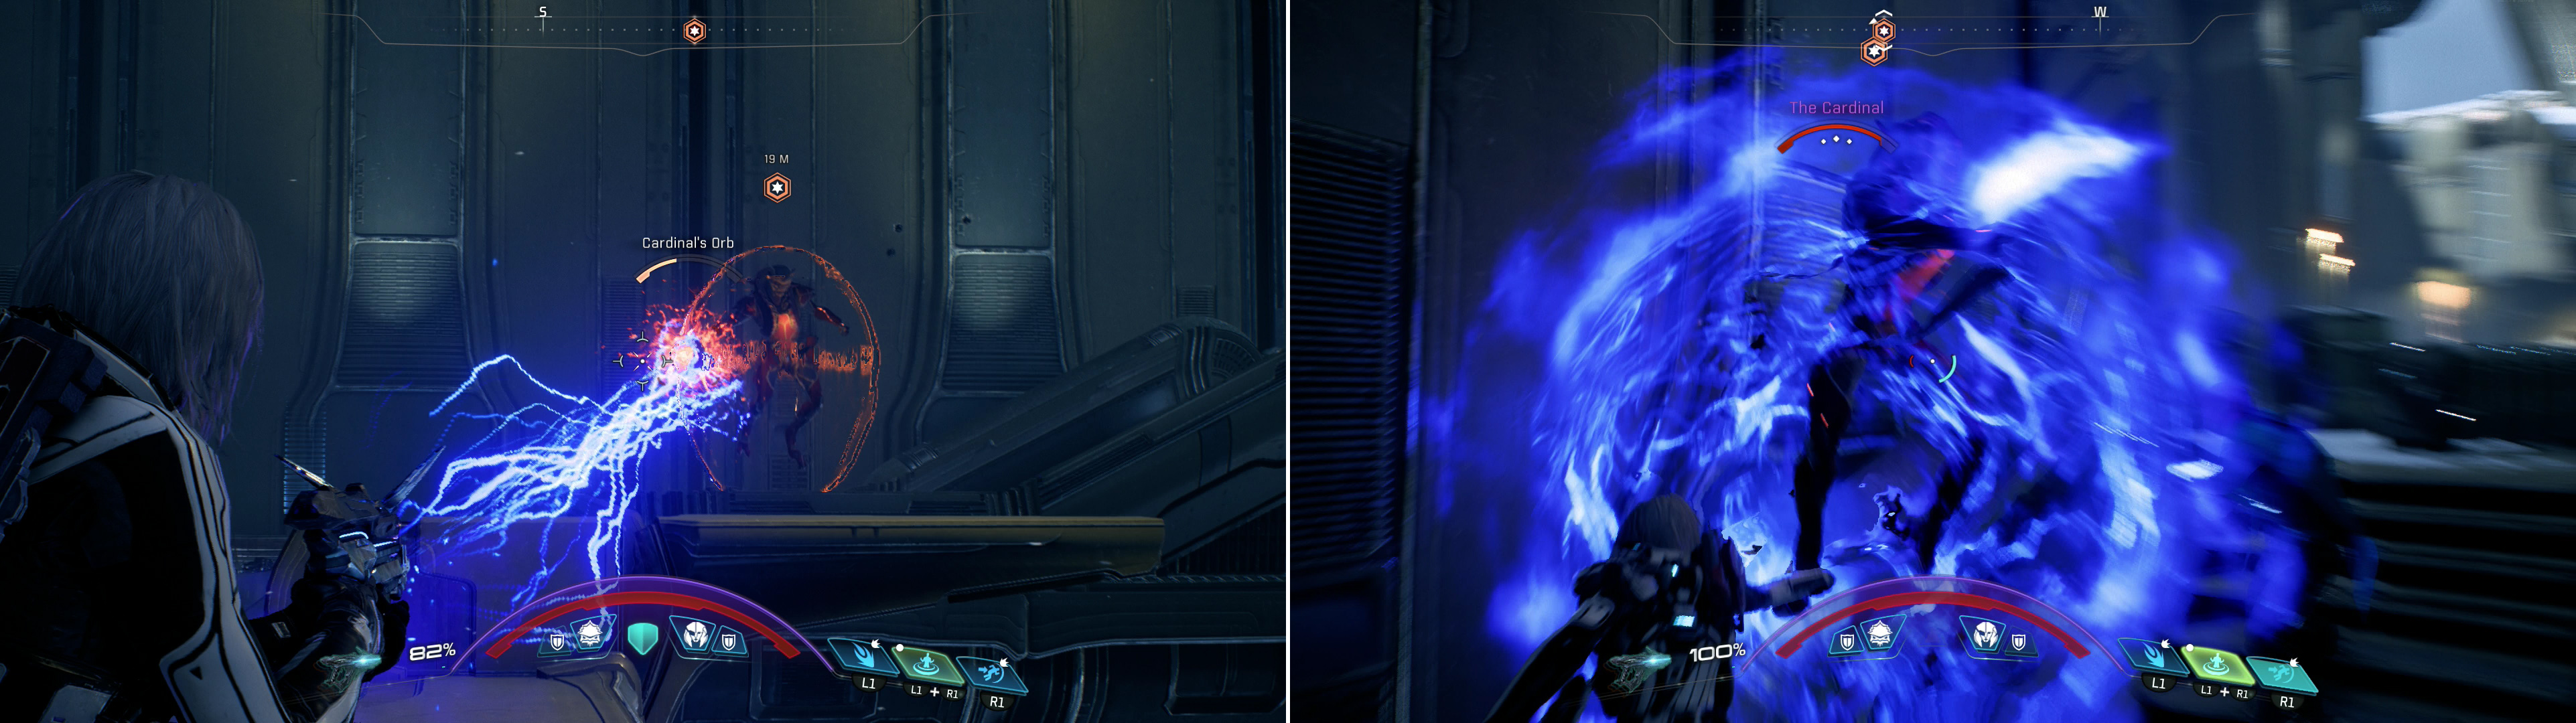 Attack the Cardinal's Orb (left) from a distance to bring down her barrier, then close in and deal as much damage as you can while she's vulnerable (right).